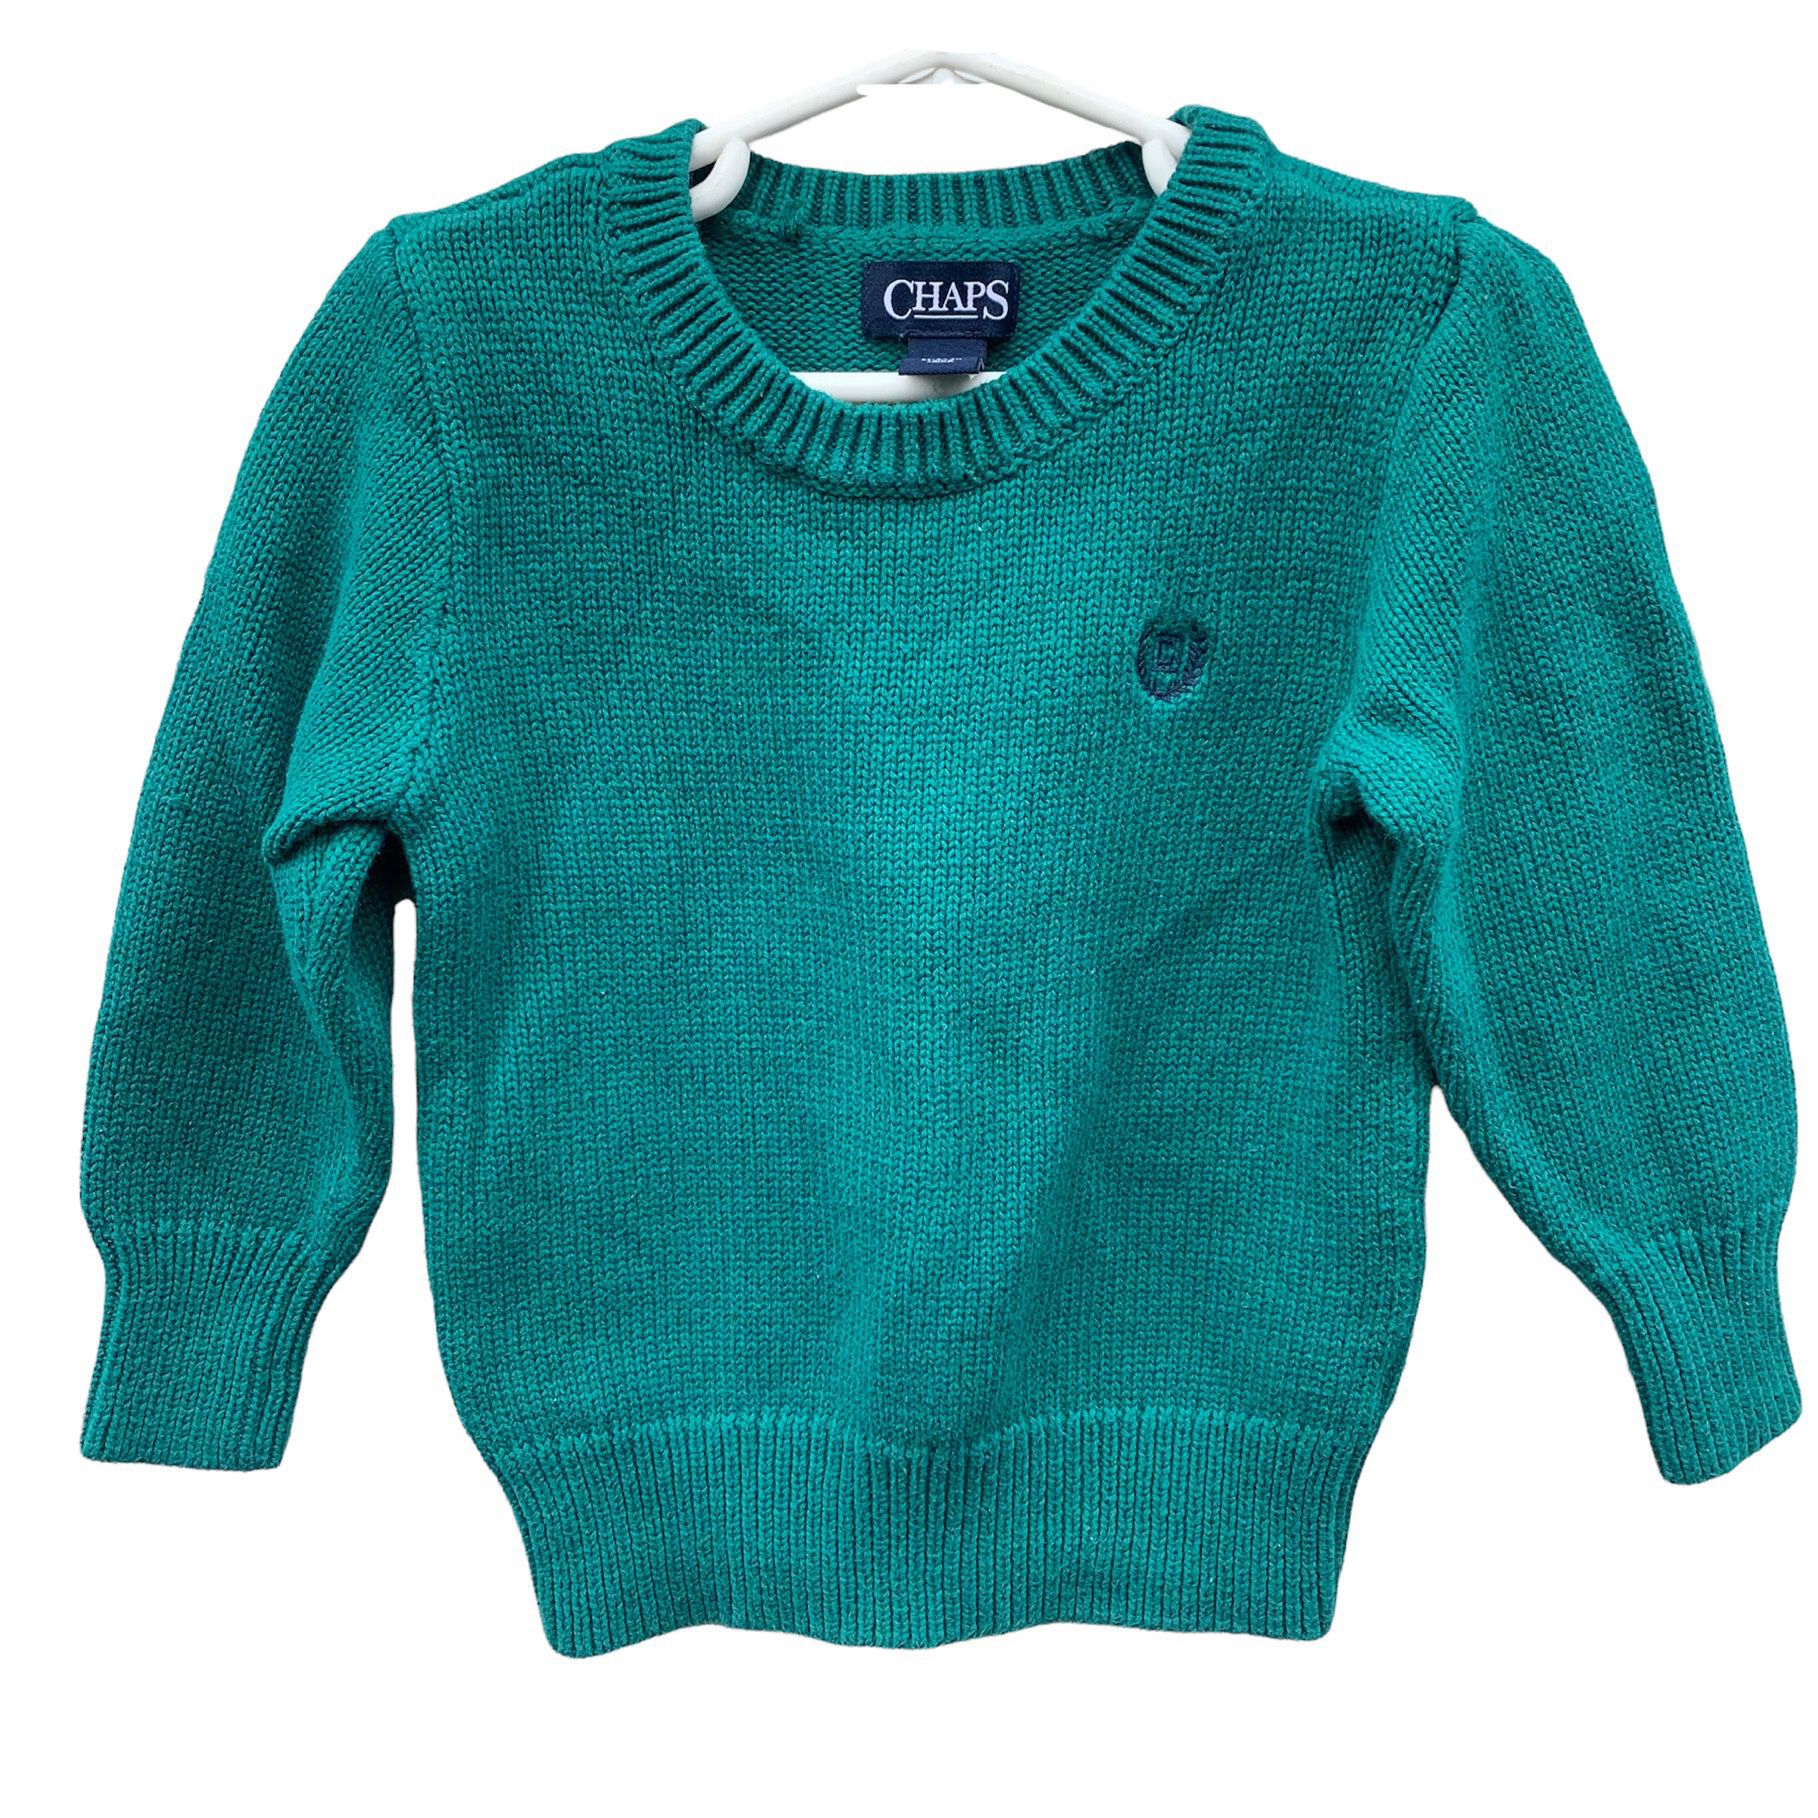 CHAPS knit pullover boy sweater Size 3T 